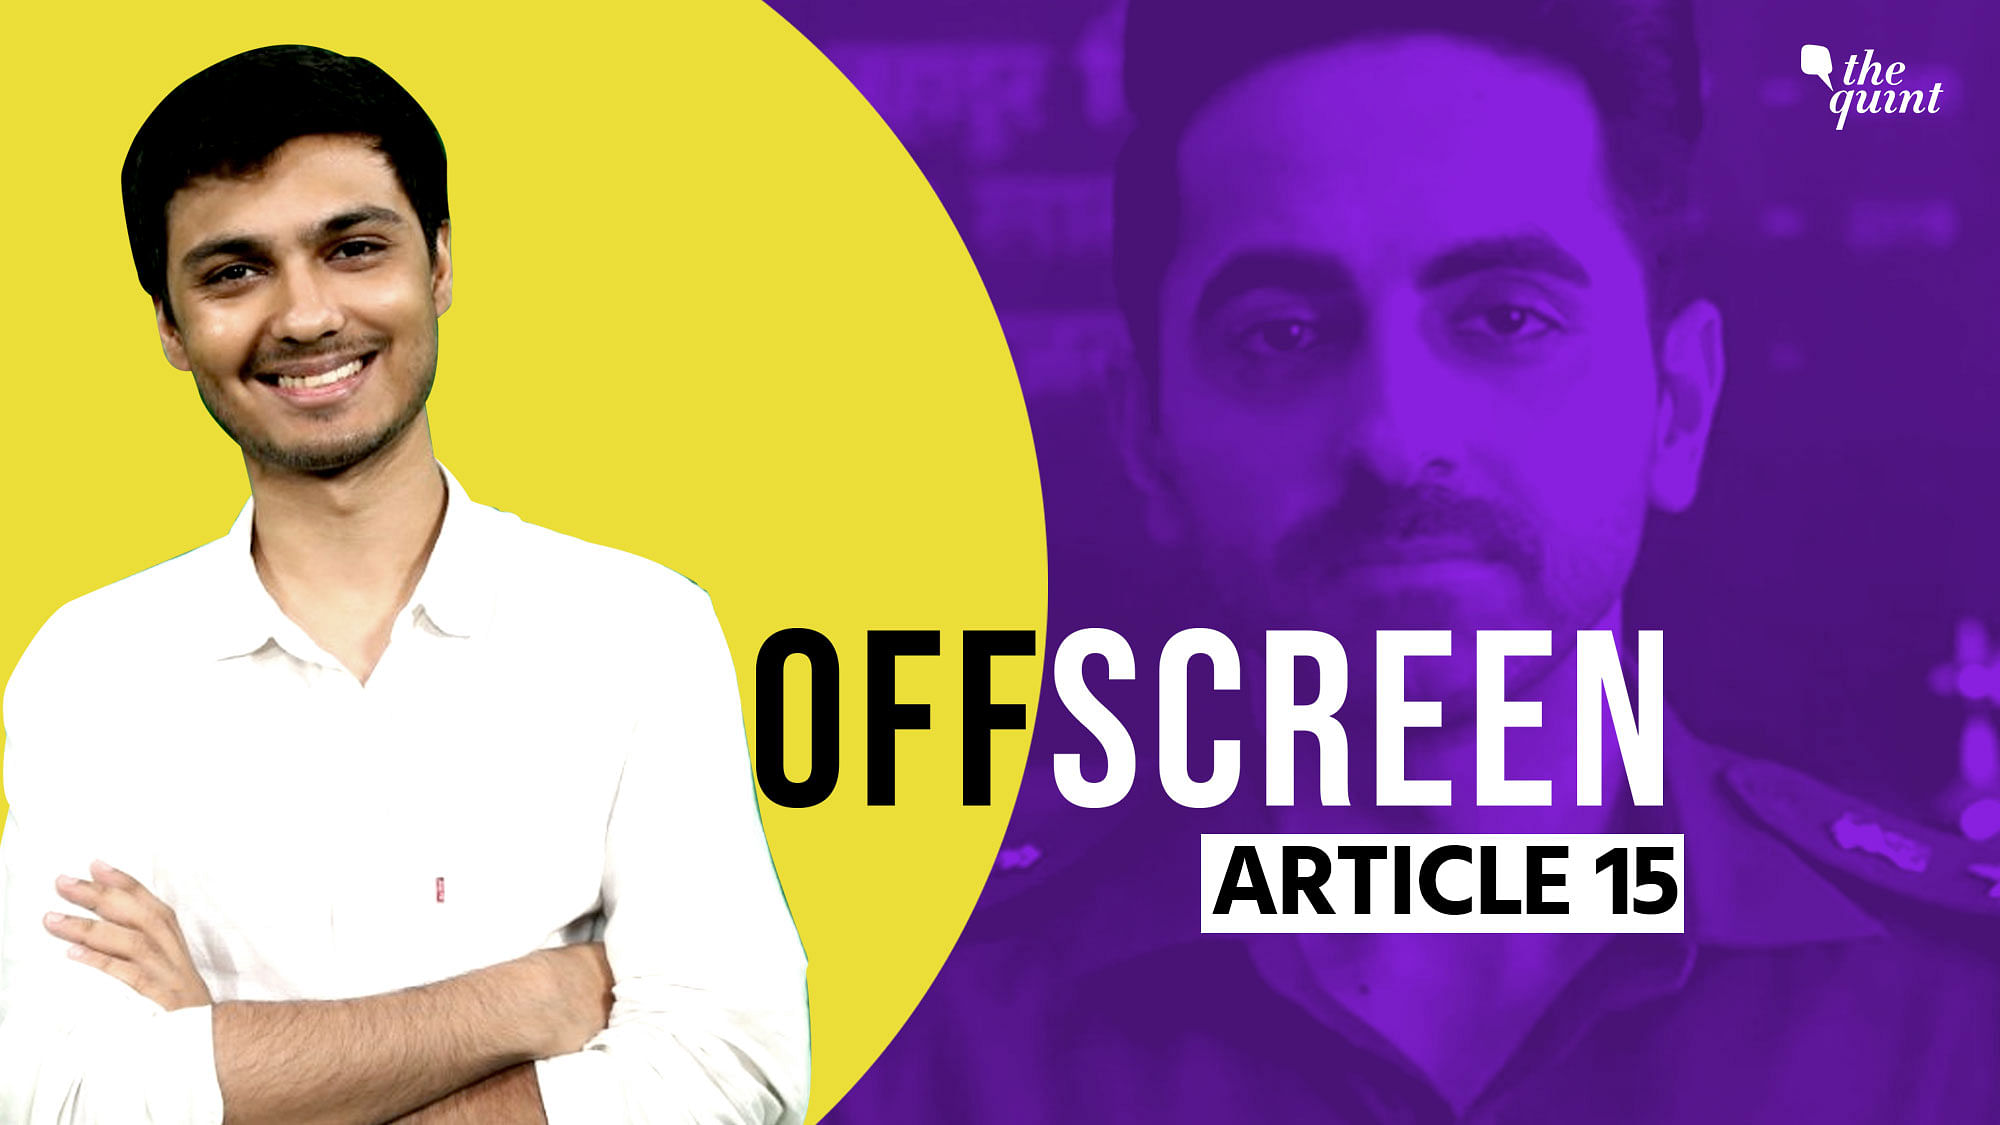 Listen to the first episode of OffScreen with writer Gaurav Solanki.